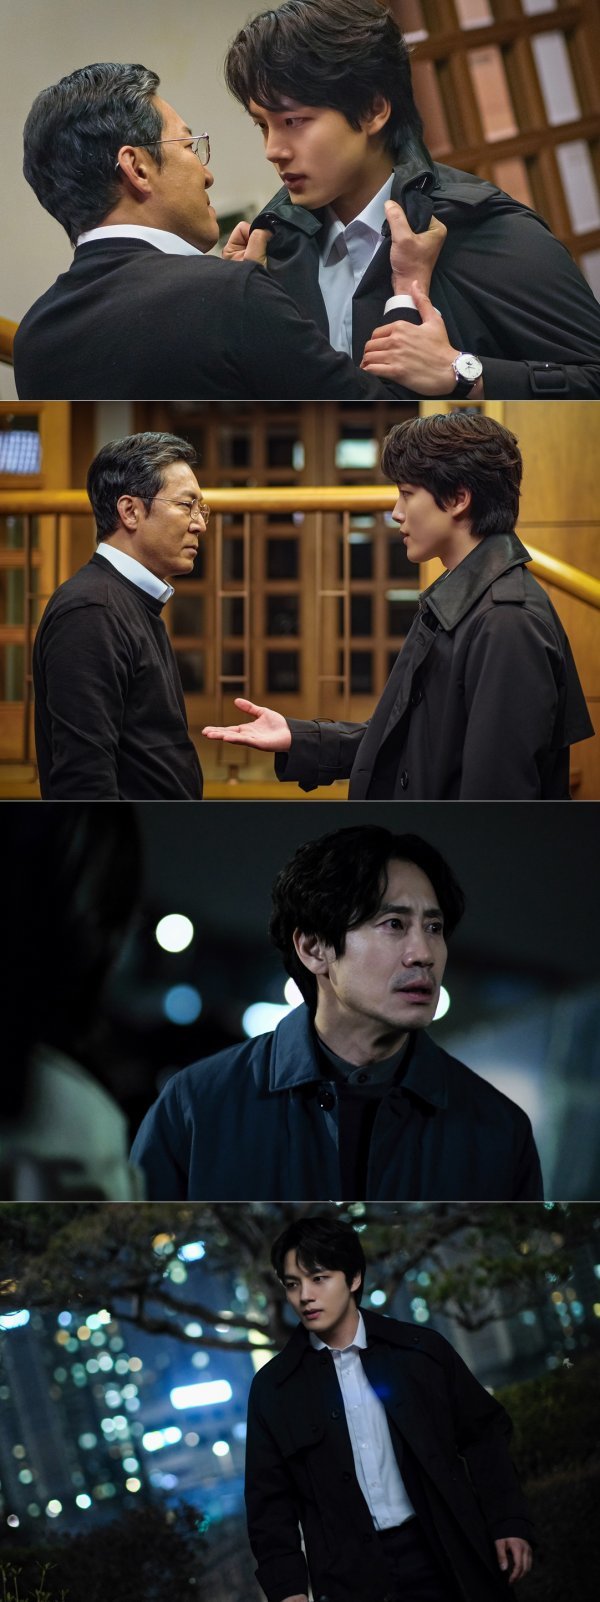 Shin Ha-kyun, Yeo Jin-goo launches the final Confidential Assignment to catch MonsterIn the last broadcast, the brutal reality of Han Ki-hwan was revealed.Han Ki-hwan was the real criminal who killed Lee Yu-yeon (Moon Ju-yeon) 21 years ago, and he bought Kang Jin-mook (Lee Kyu-hoe) suicide teacher to Yichang photos (Heo Sung-tae) to cover it up.Faced with his father Han Gi-hwans real face, One is awash with uncontrollable Furious.The ending of walking to Han Ki-hwan with a heavy rain all over his body predicted a strong storm.In the meantime, Hanju One and Han Ki-hwans day confrontation in the public photos amplifies the tension.Han Ki-hwan, who maintains a poker face under any circumstances, is holding Furious by holding a one-week neck.One of the sharp eyes of one week against this, which can not be used even in the sharp eyes, is interesting to see One, who erases his face and hands his father Han Ki-hwan.What is the meaning of his smile? In the previous trailer, the appearance of One, My father, you must be the police chief, was also revealed, raising questions about his unstoppable move.The shocking figure of the mobile type further heightens the sense of Danger: the mobile type that was willing to go to his Monster mall with his belief in One Week.The unsettled contrast between him and One, who heads somewhere, predicts unpredictable development until the end.In the 15th broadcast on the 9th, the final Confidential Assignment is held to prevent the tragedy of the mobile and one week.The relationship between Han Ki-hwan, Yichang photos (Heo Sung-tae) and Doha One (Gil Hae-yeon) also comes to a head and brings a blue.Watch what the Furious of One would be a factor in tracking truth, the Monster crew said.We hope that Shin Ha-kyun and Yeo Jin-goo will be able to see the synergy of the peak of the show, he said.The 15th episode of Monster will air at 11 p.m. on the 9th.